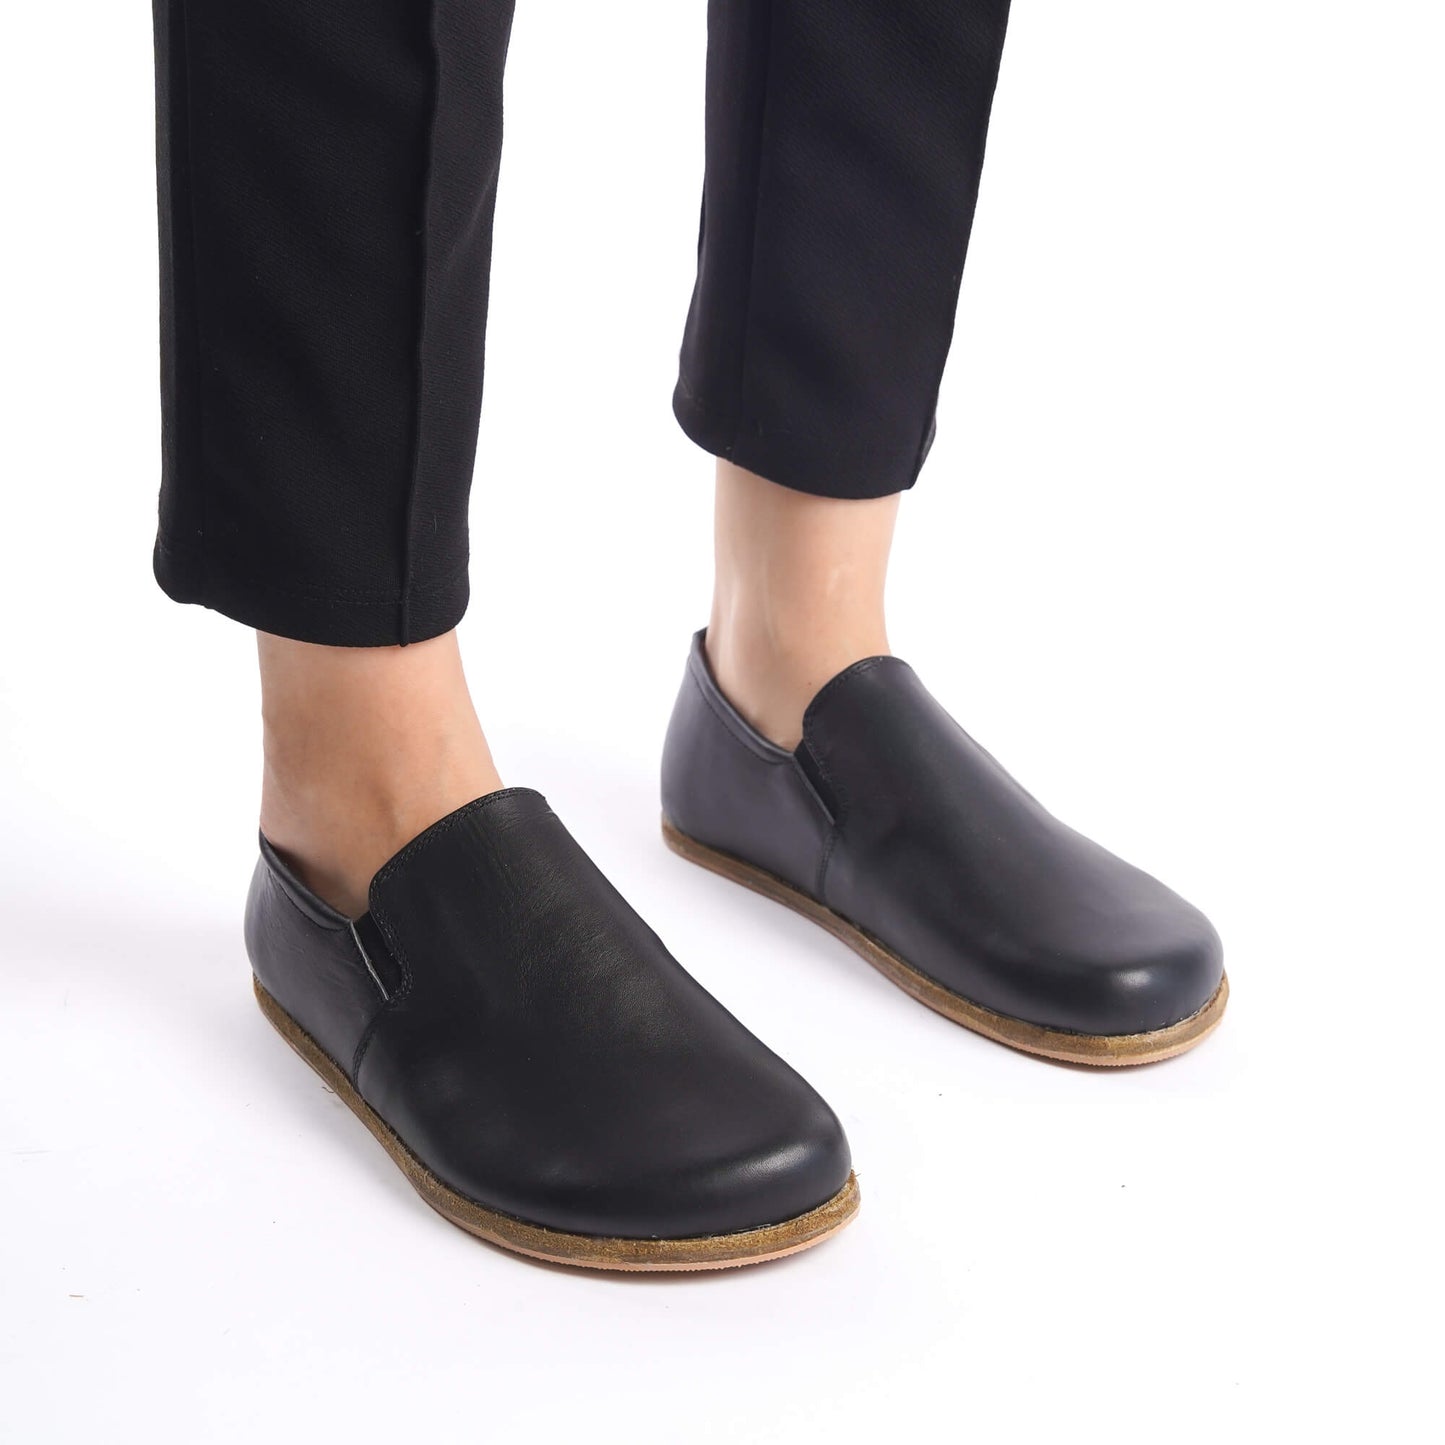 Ionia Black Leather Loafers - Front View with Outfit